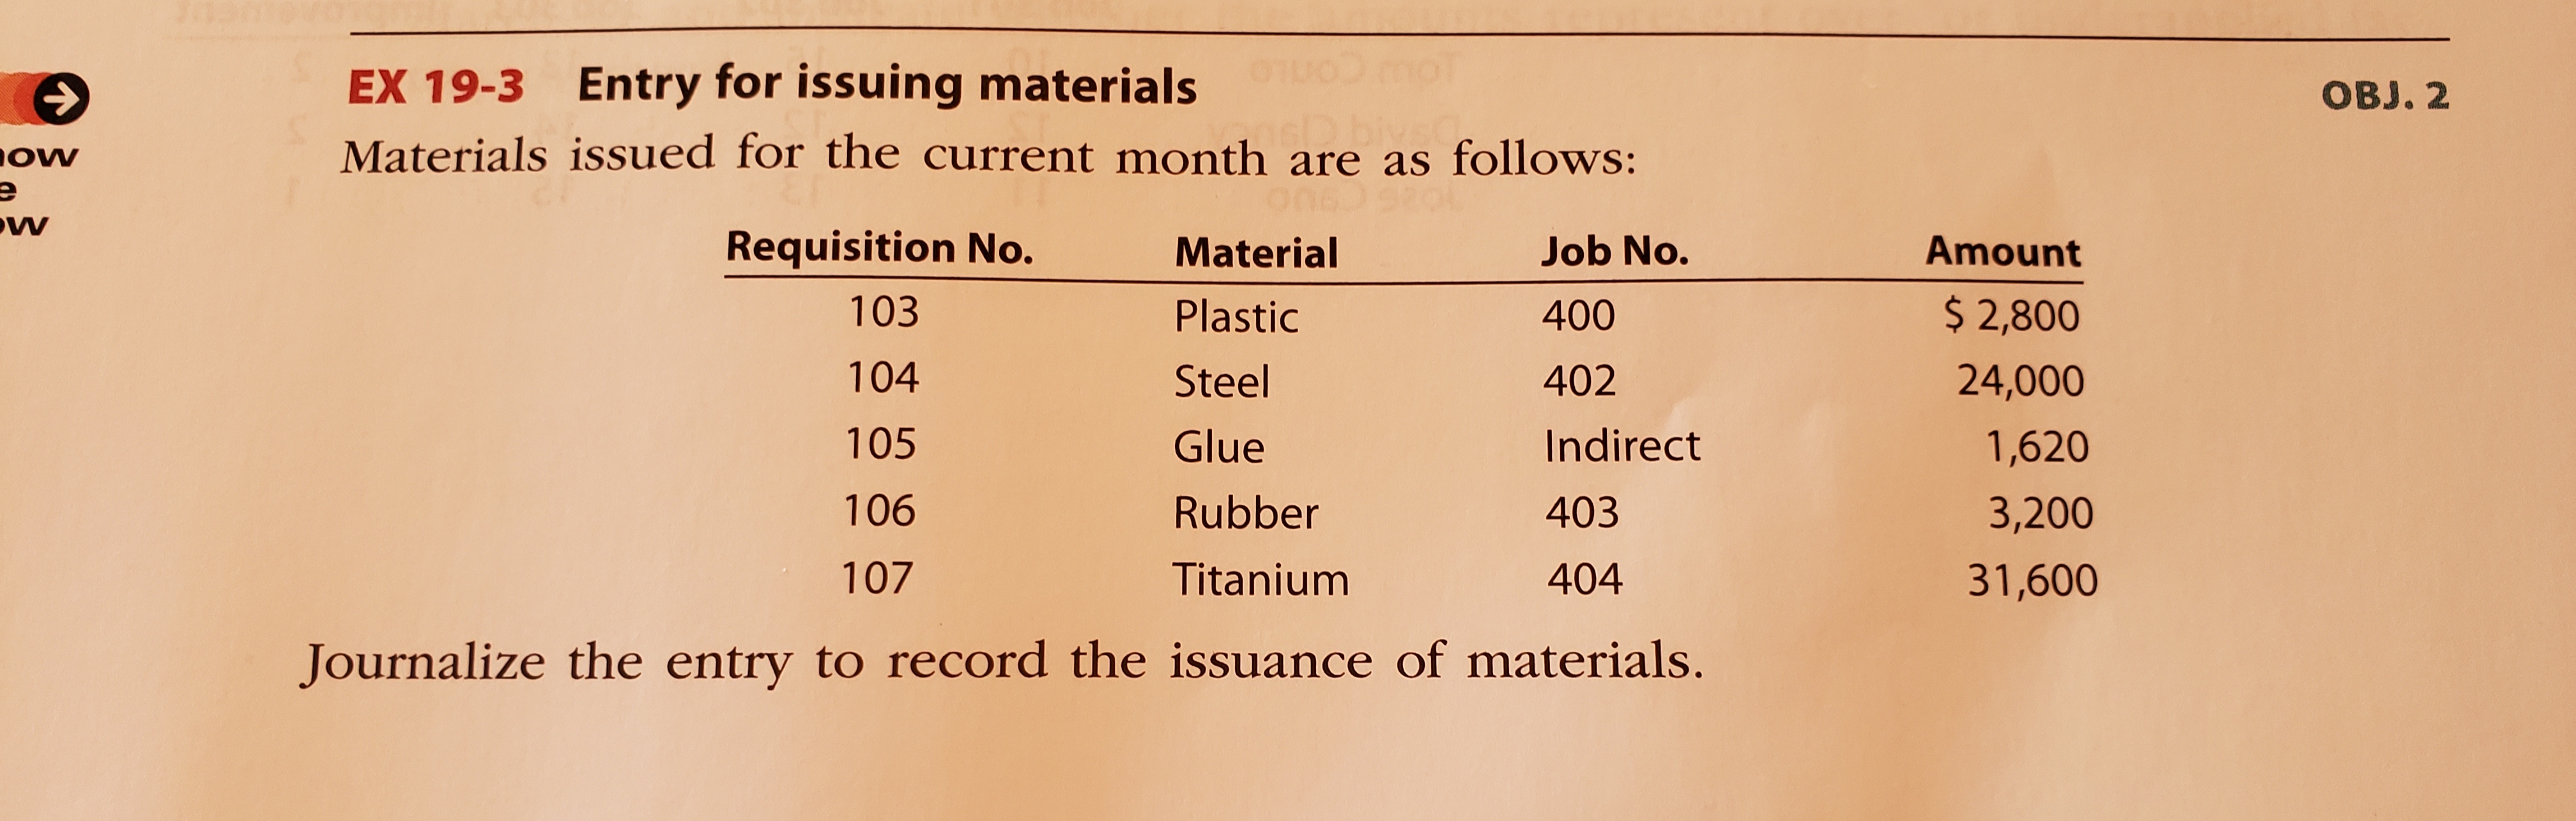 EX 19-3 Entry for issuing materials
OBJ. 2
Materials issued for the current month are as follows:
Requisition No.
Material
Job No.
Amount
103
Plastic
400
$ 2,800
104
Steel
402
24,000
105
Glue
Indirect
1,620
106
Rubber
403
3,200
107
Titanium
404
31,600
Journalize the entry to record the issuance of materials.
